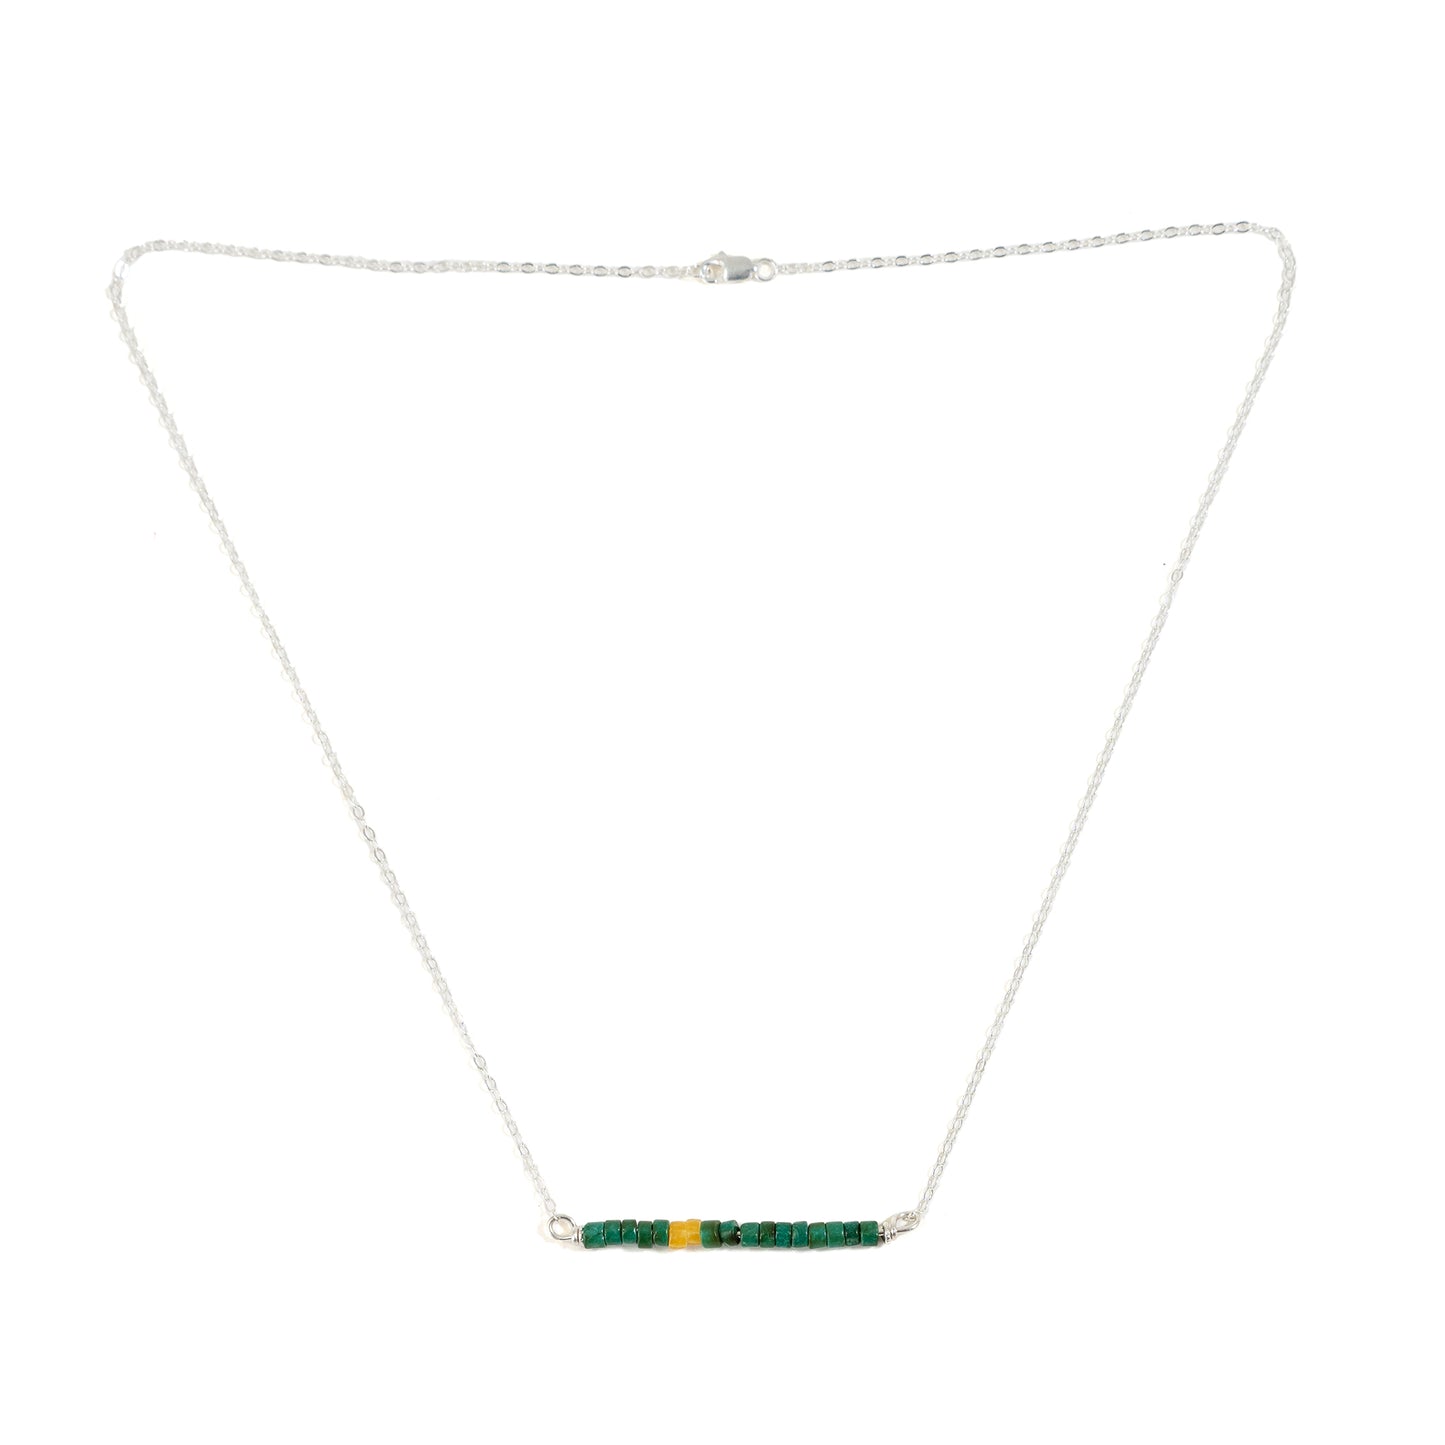 Silver Necklace with Turquoise Bead Bar